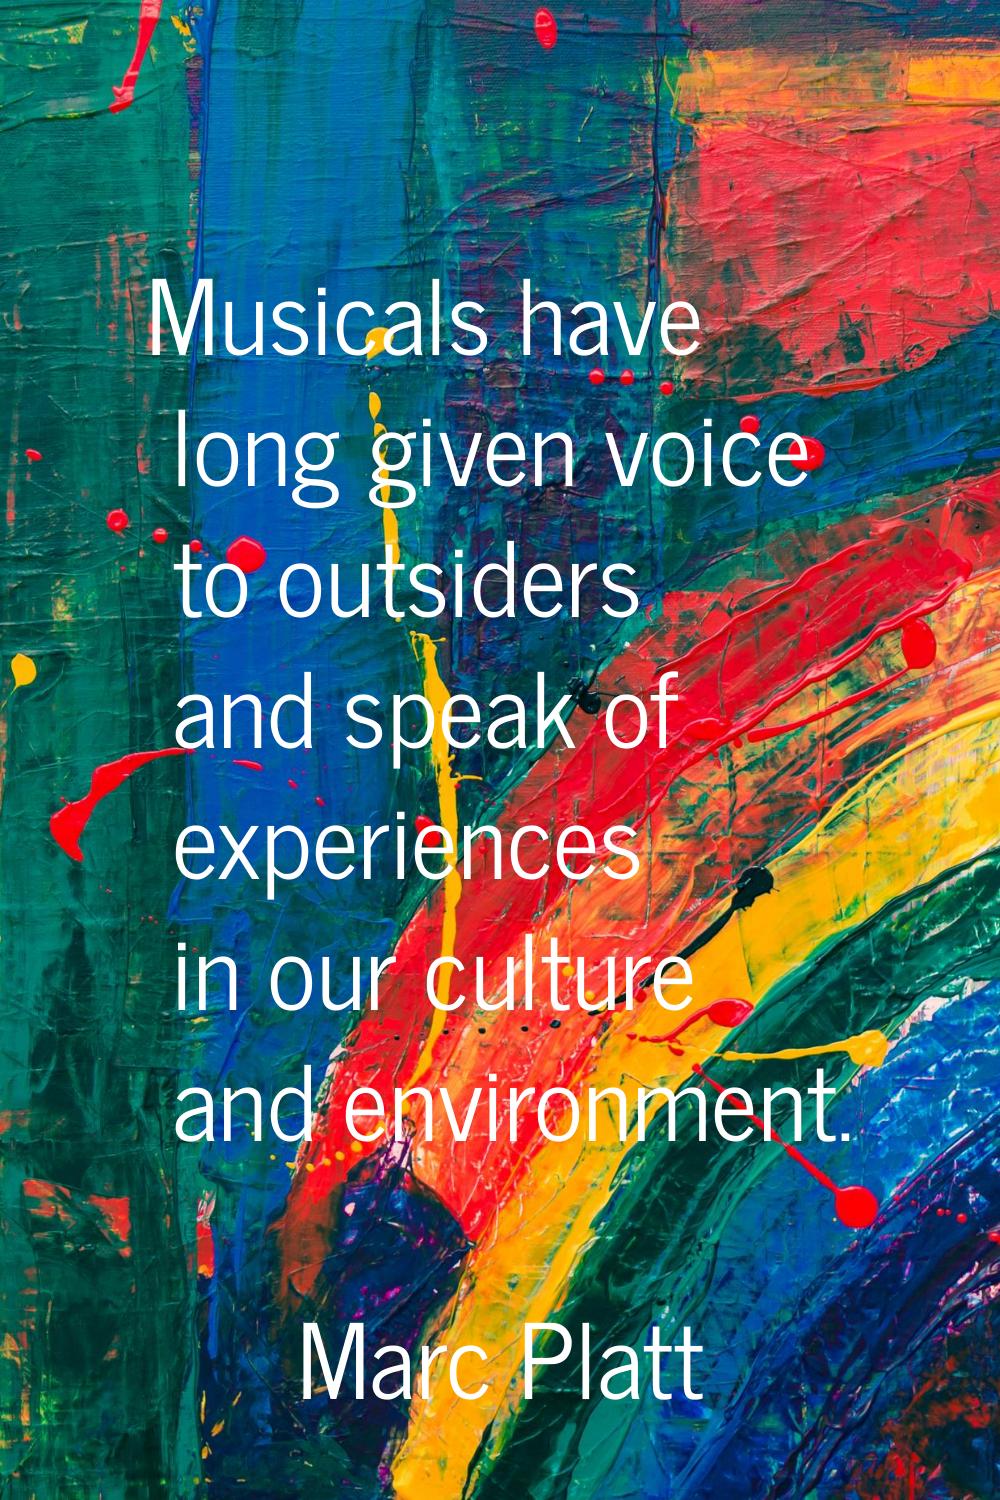 Musicals have long given voice to outsiders and speak of experiences in our culture and environment